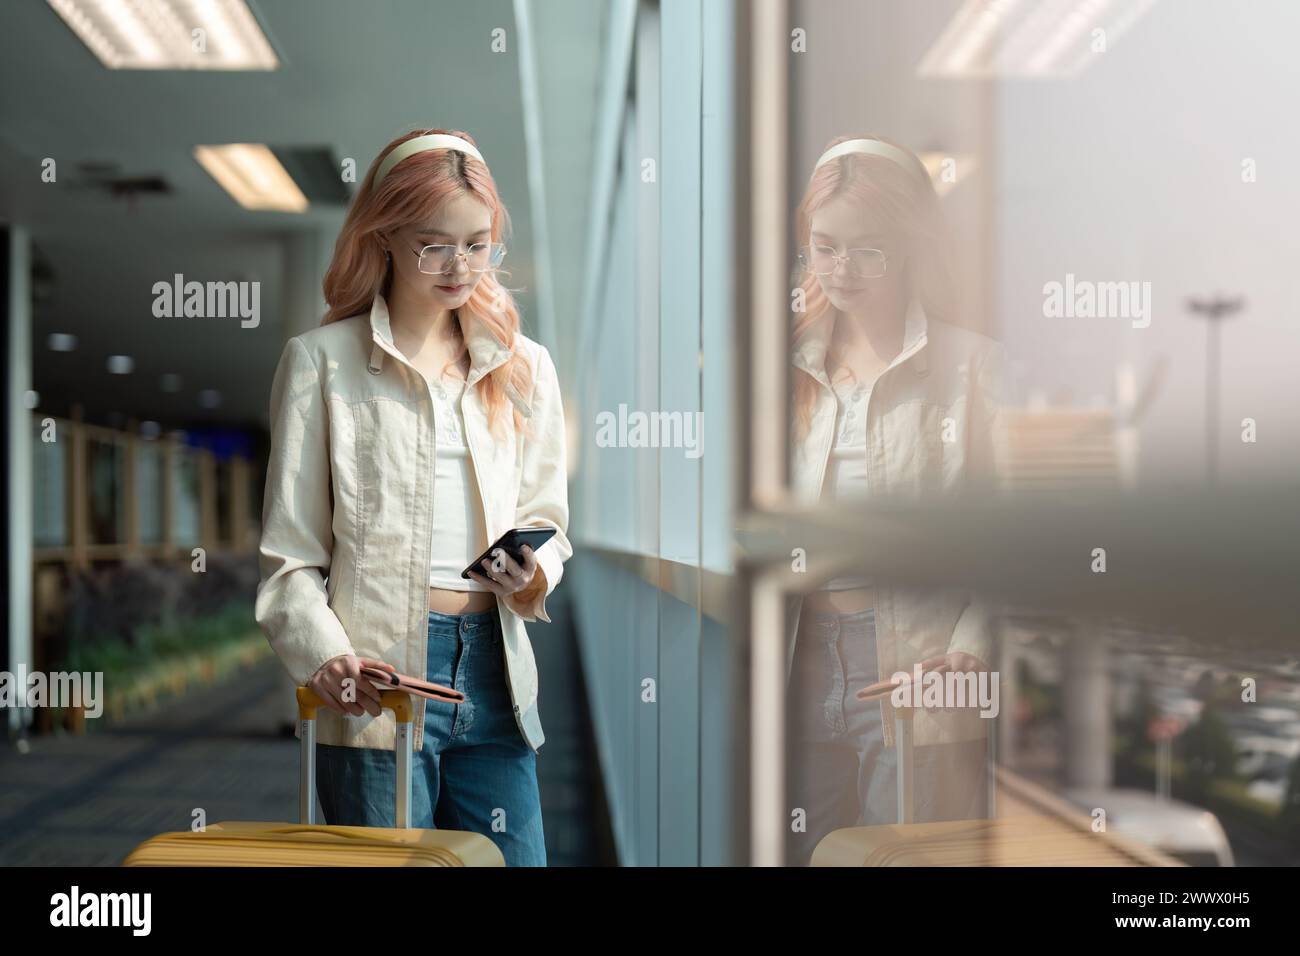 Traveler woman asian in airport and luggage for vacation, smile and talking on the phone check boarding ticket. Female traveler with suitcase Stock Photo